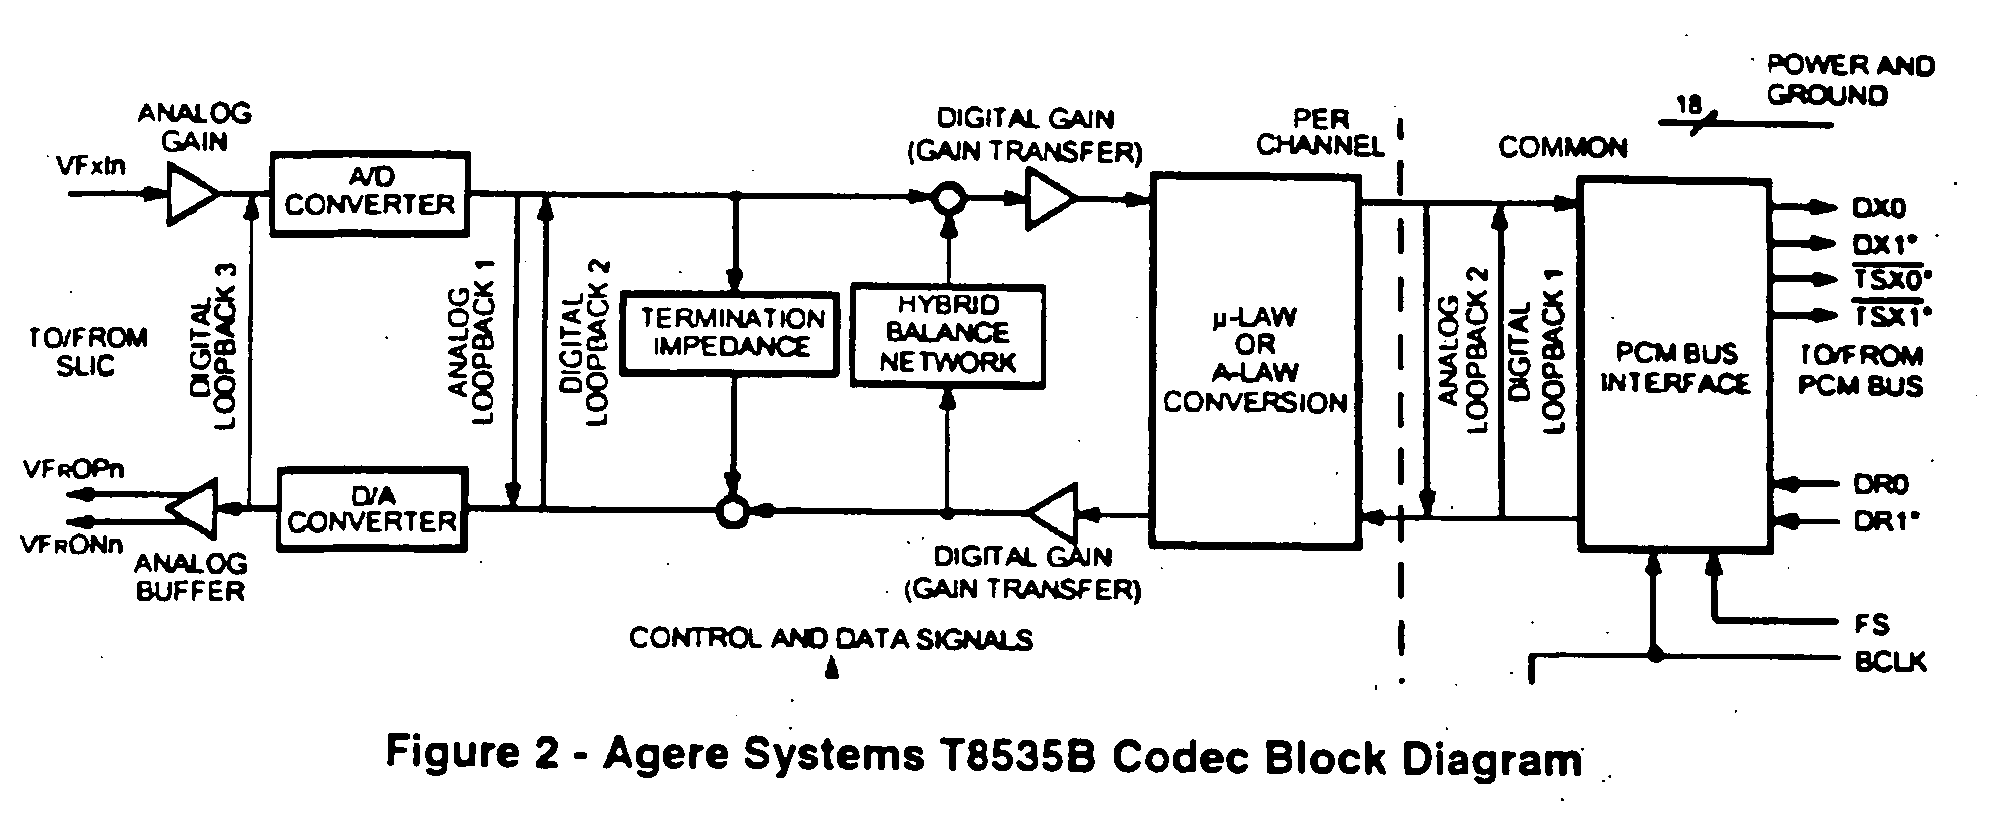 3-Way call detection system